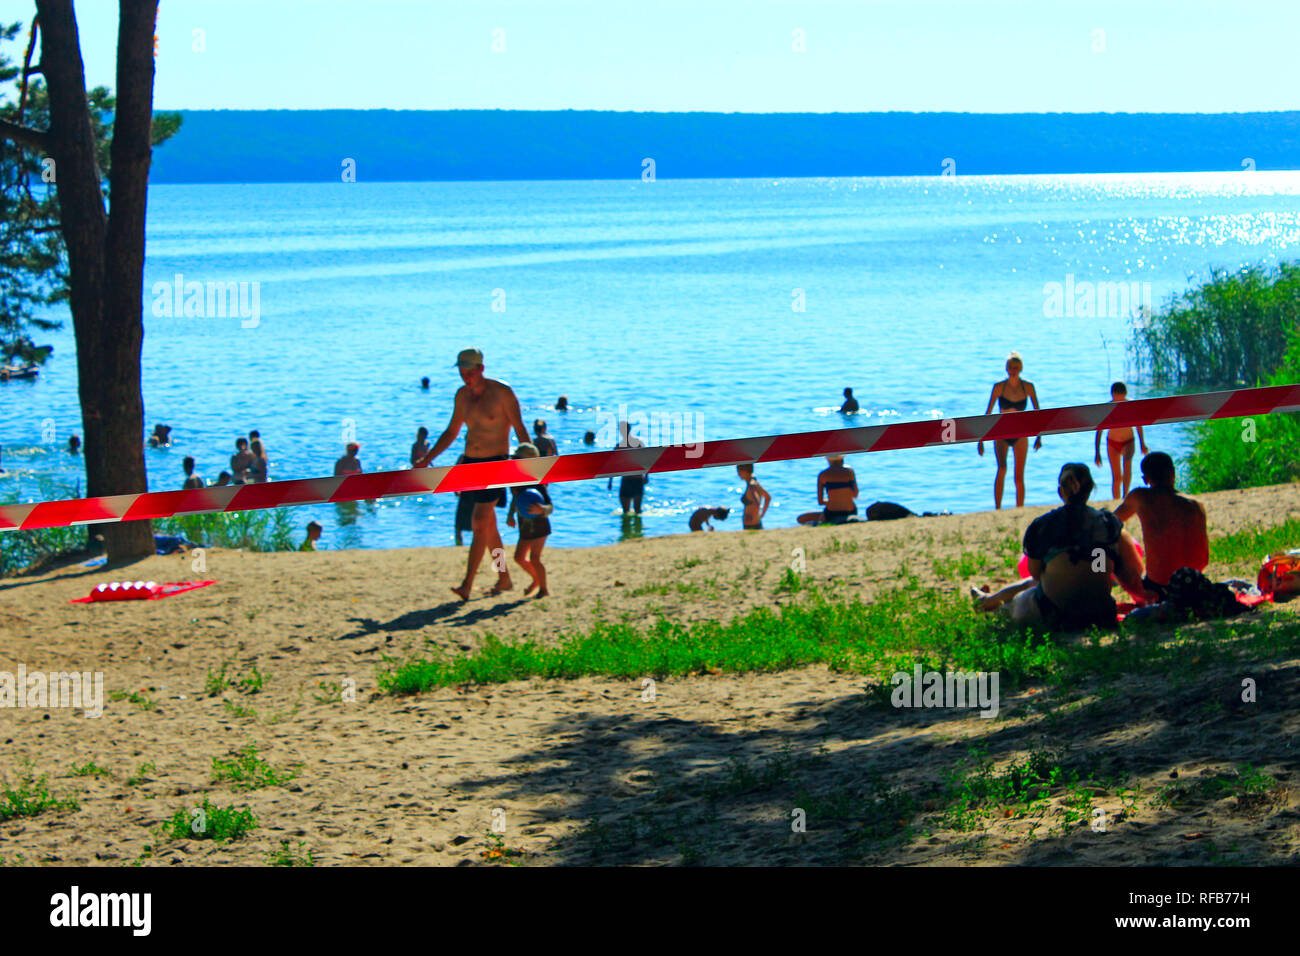 People bathe in lake and sunbathe in restricted area. Territory enclosed by ribbon forbidding entrance. People ignore ban on bathing in Pechenizhskoye Stock Photo